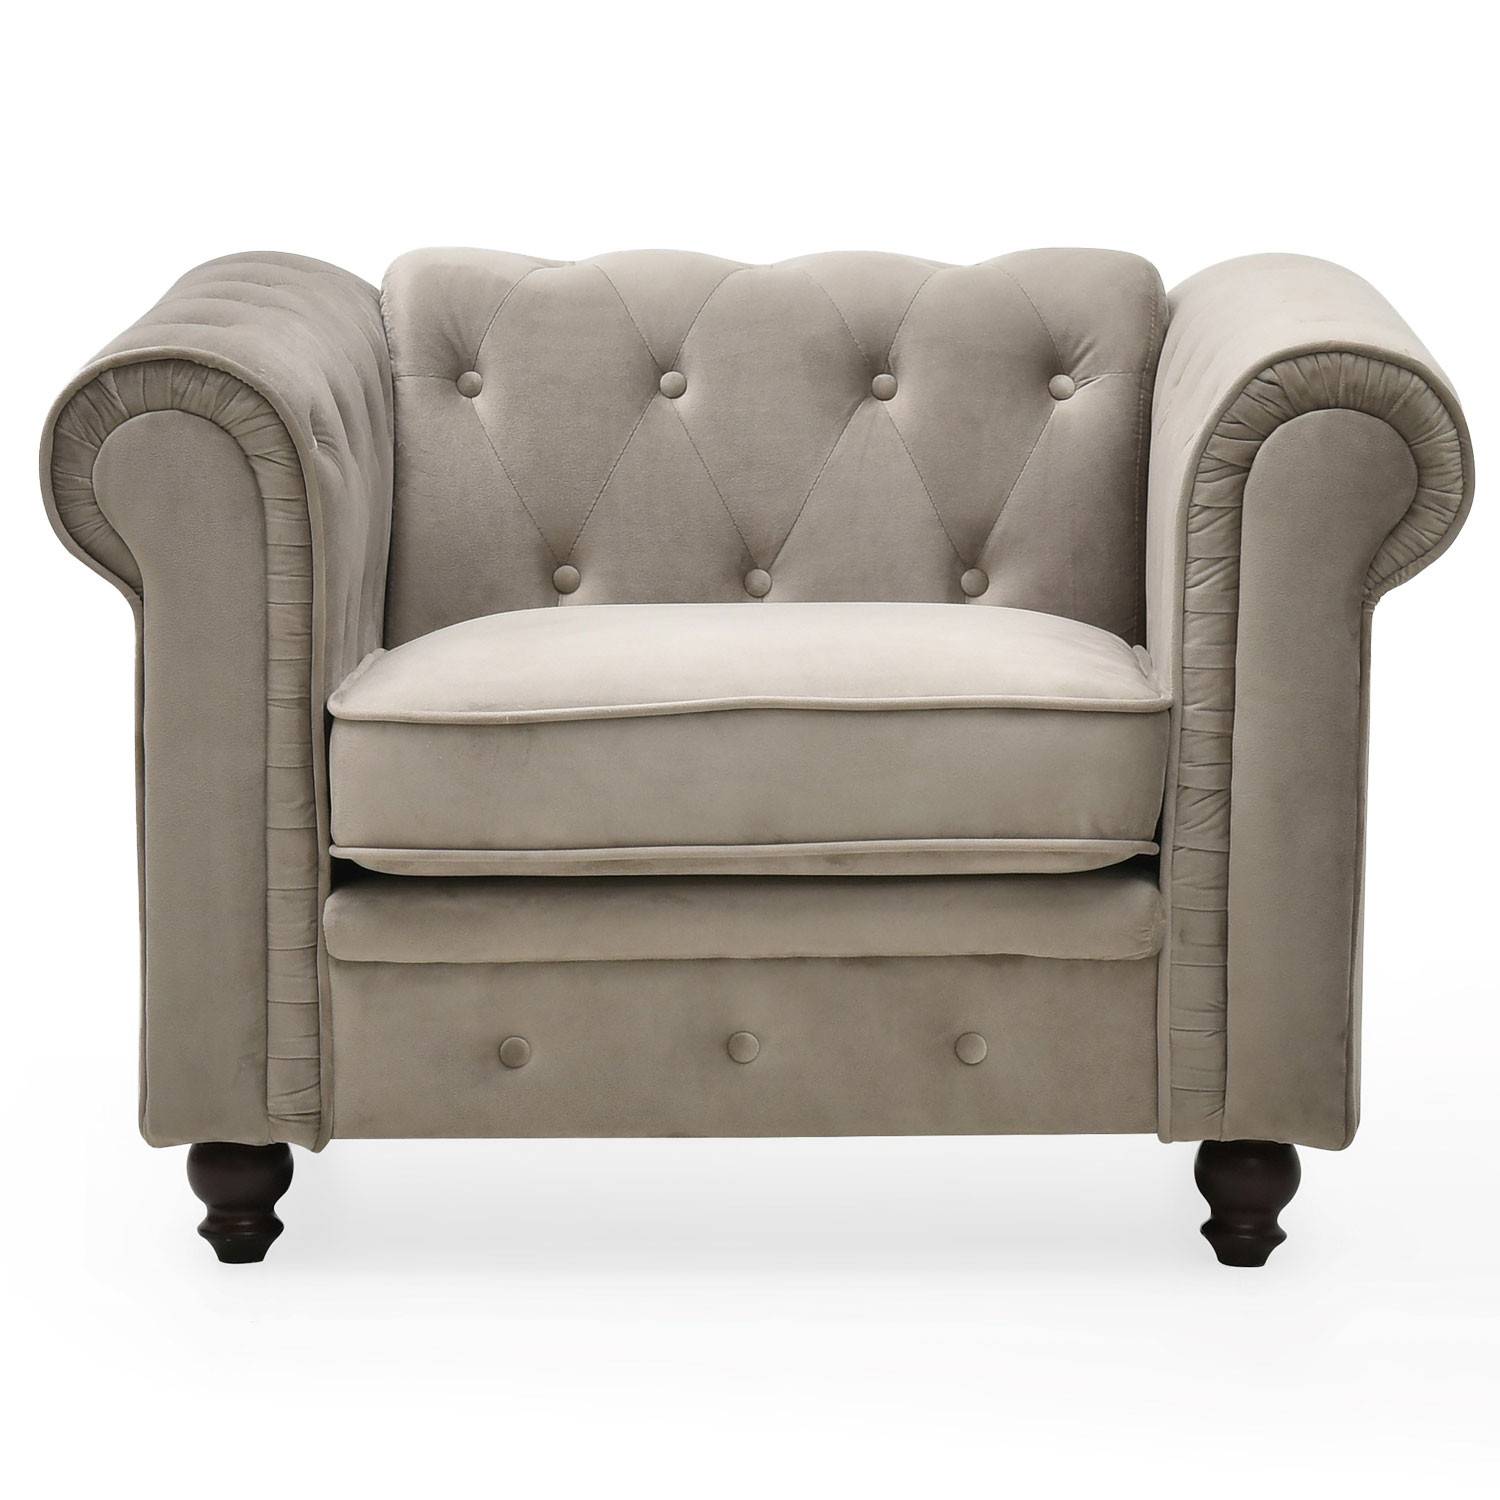 Grote Chesterfield fauteuil Taupe fluweel